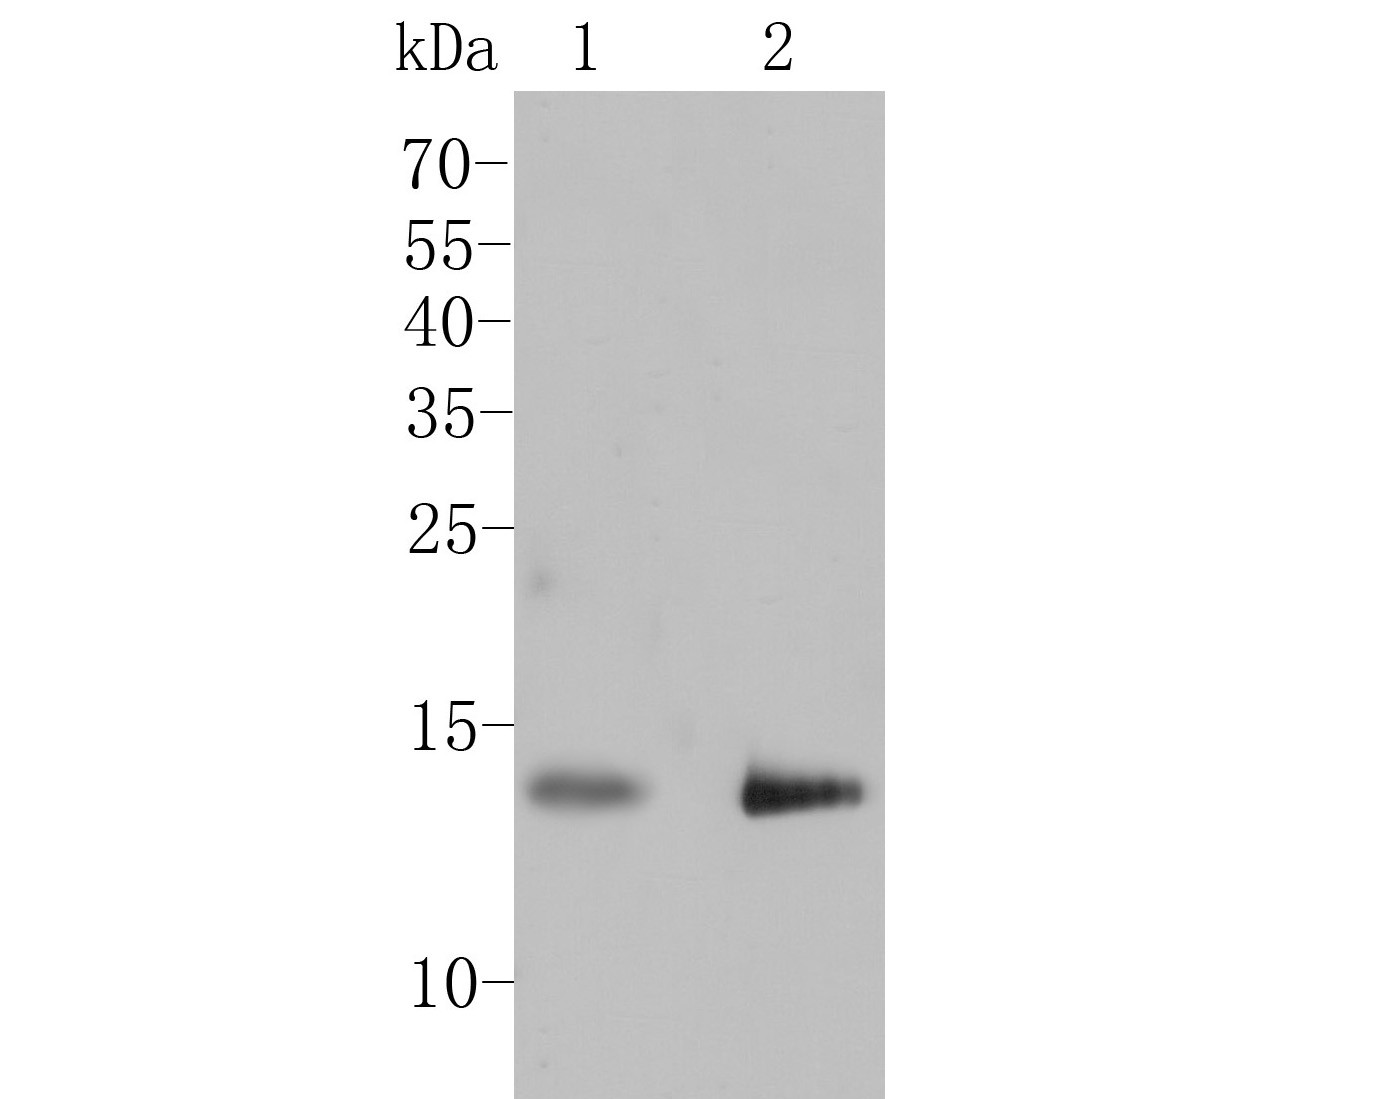 Western blot analysis of GABARAPL2 on different lysates. Proteins were transferred to a PVDF membrane and blocked with 5% BSA in PBS for 1 hour at room temperature. The primary antibody (ER1901-73, 1/100) was used in 5% BSA at room temperature for 2 hours. Goat Anti-Rabbit IgG - HRP Secondary Antibody (HA1001) at 1:5,000 dilution was used for 1 hour at room temperature.<br />
Positive control: <br />
Lane 1: 293 cell lysate<br />
Lane 2: SHSY5Y cell lysate